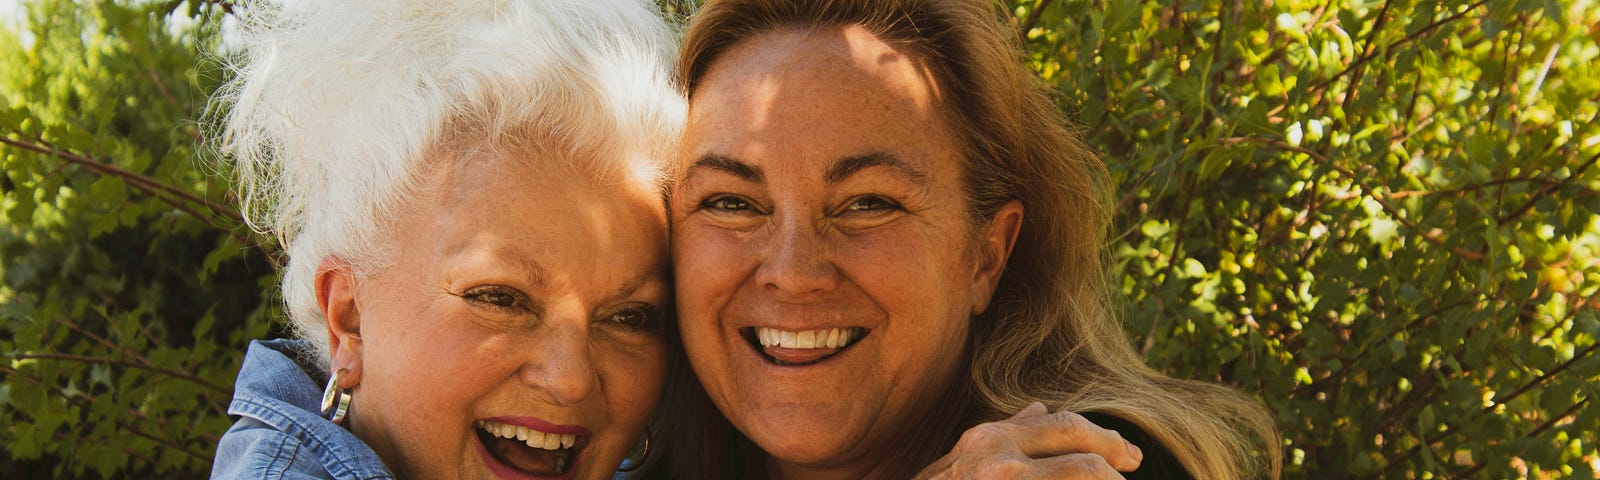 Image of two women, one older and one younger, both looking happy